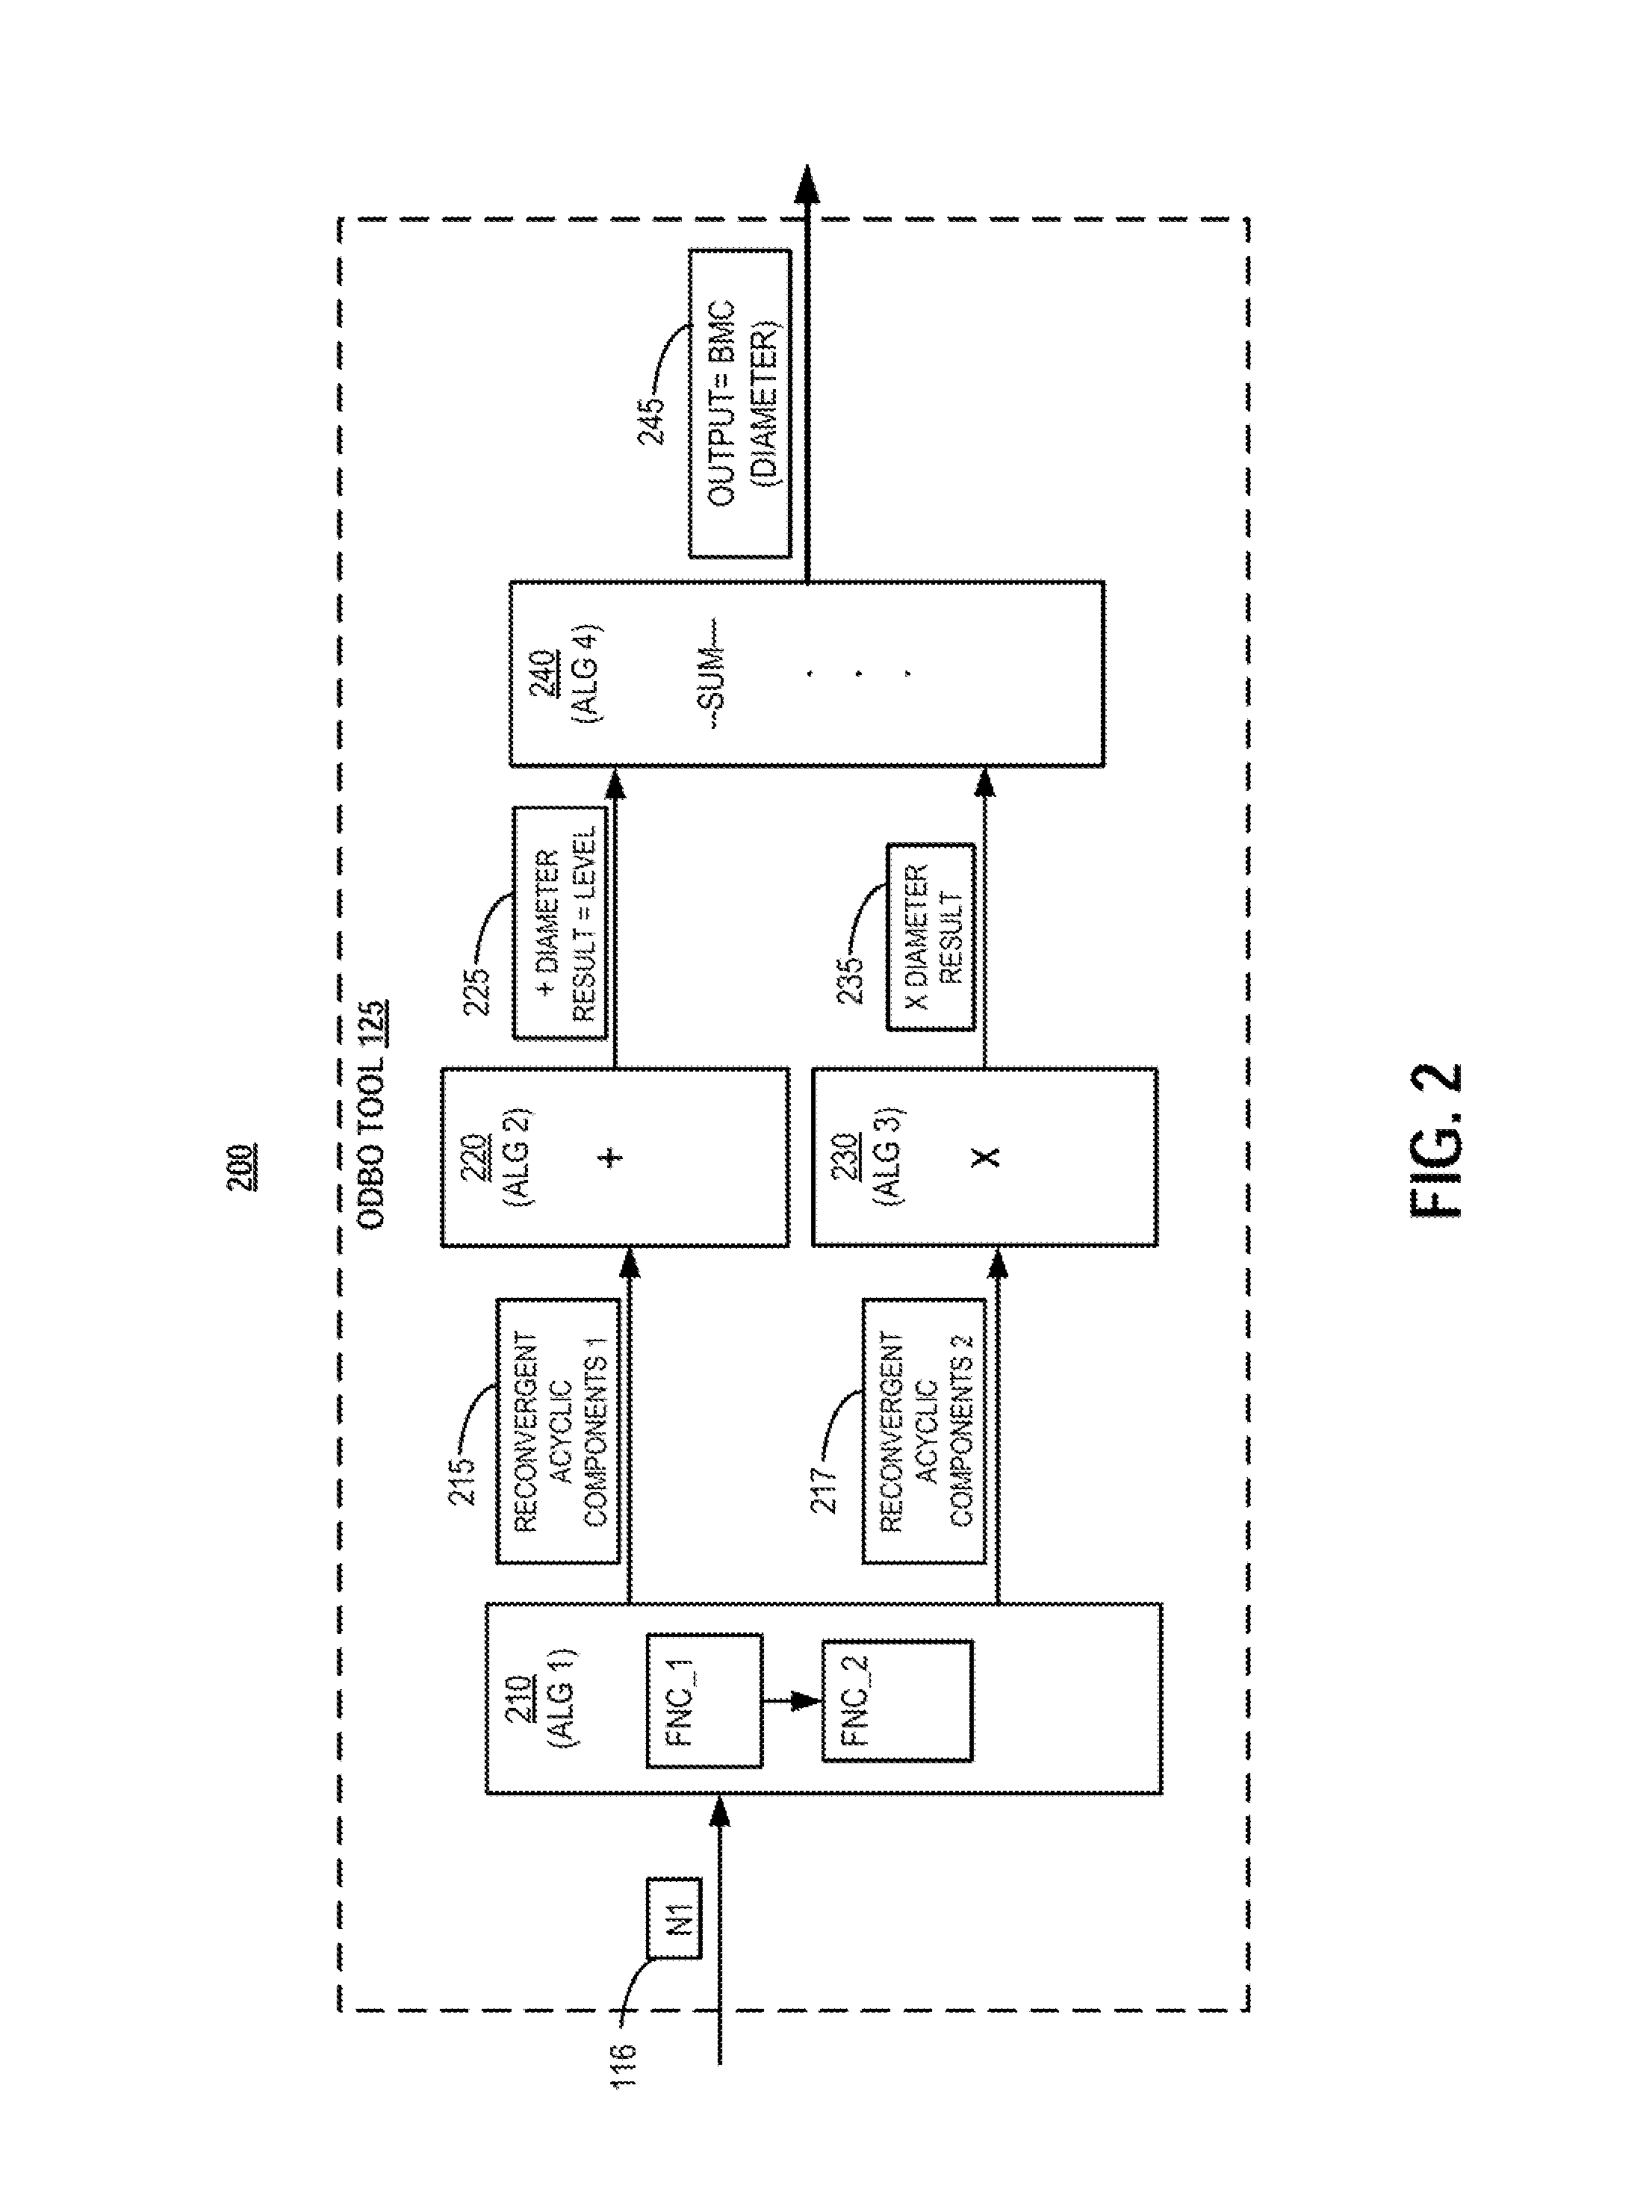 Method and system for optimal diameter bounding of designs with complex feed-forward components